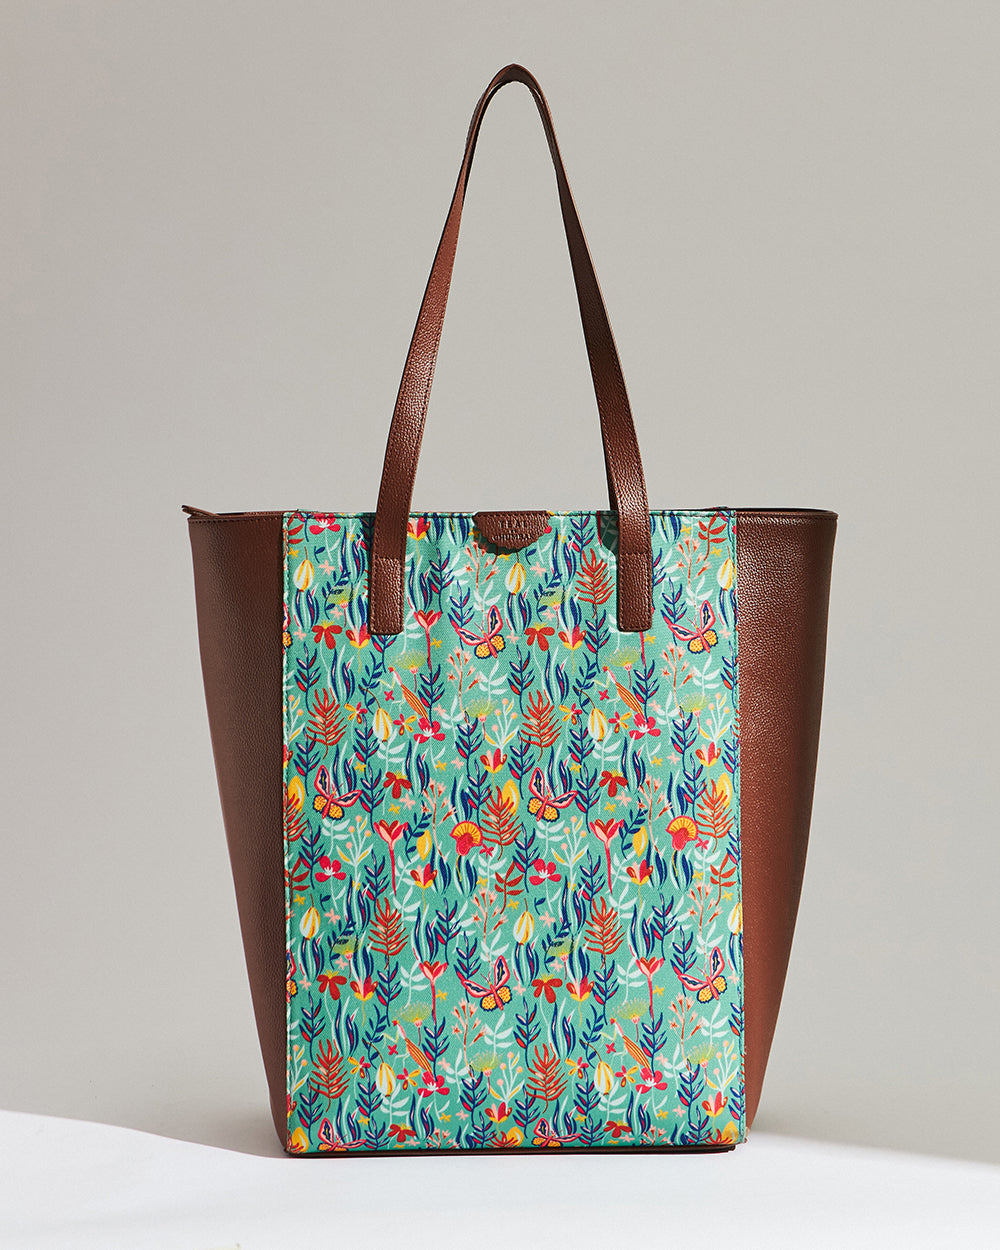 Shopper Tote | Carry Essentials in Style